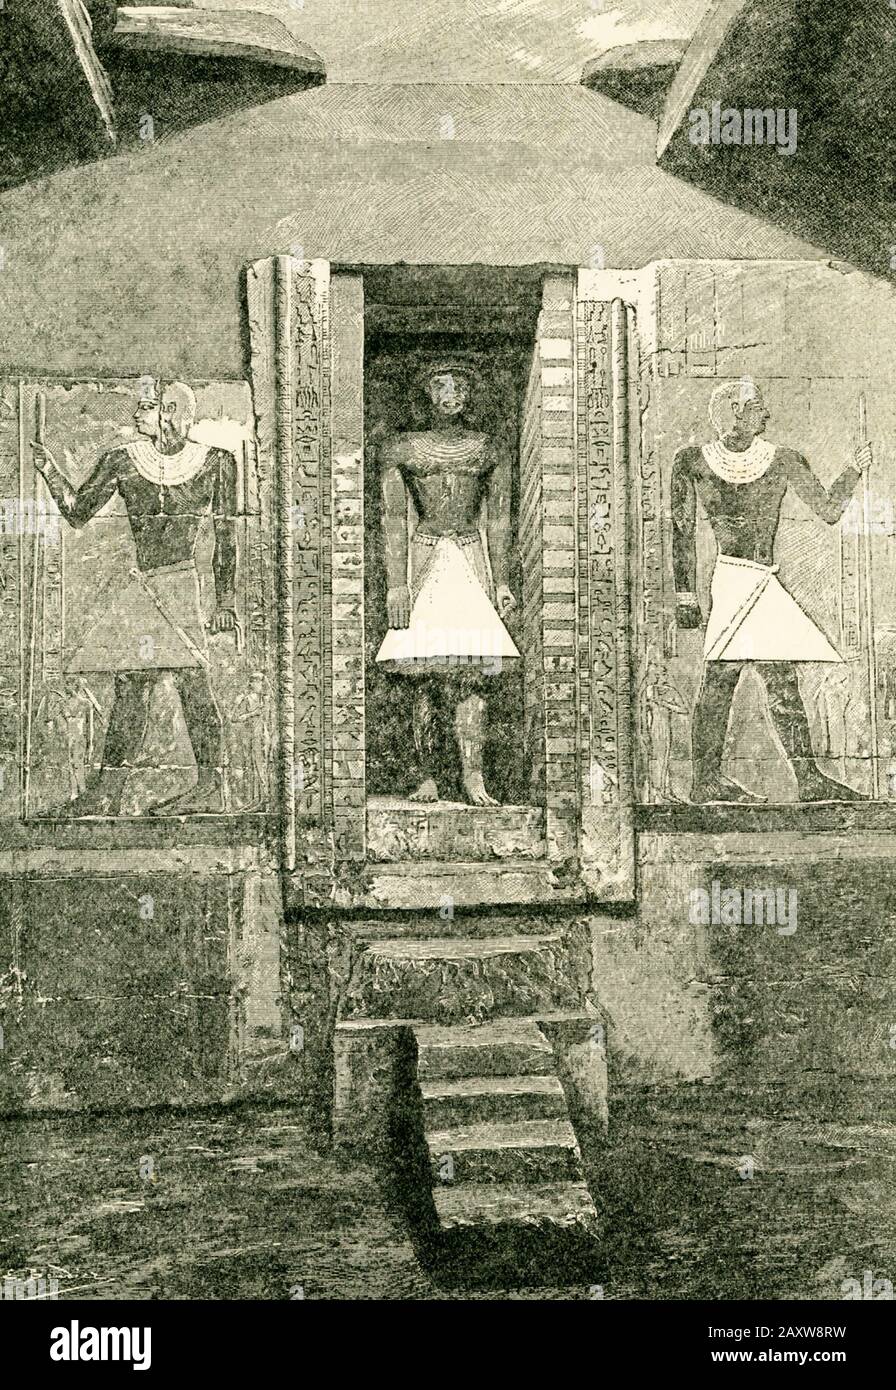 Stele in the form of a door, and the statue of the tomb of Mirruka, drawn by Boudier from a photograph of the tomb of Mirruka drawn by M de Morgan.  Mirruka is now more commonly spelled Mereruka.  The mastaba of Mereruka is the largest and most elaborate of all the non-royal tombs in Saqqara with 33 rooms or chambers in total. Mereruka was the vizier to king Teti (C 2323-2191 BC)the first ruler of the 6th dynasty (c 2323-2150 BC) Old Kingdom period of Egypt. Stock Photo